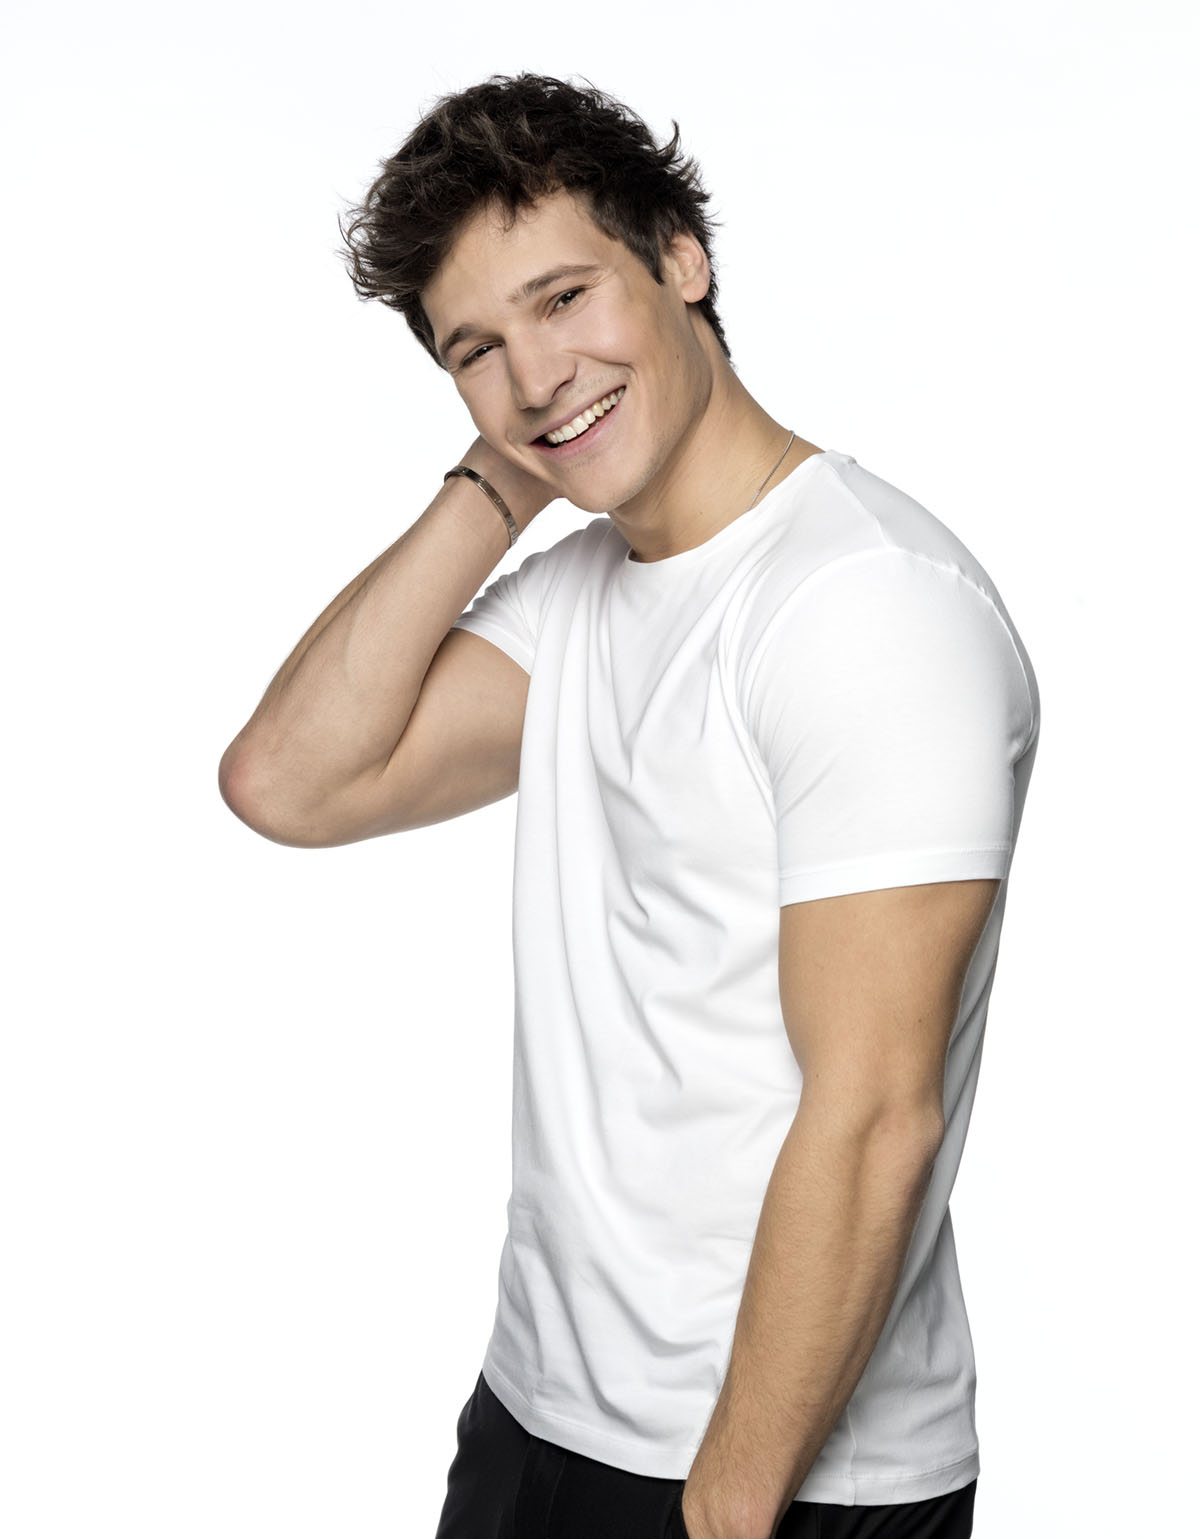 Covershooting mit Wincent Weiss